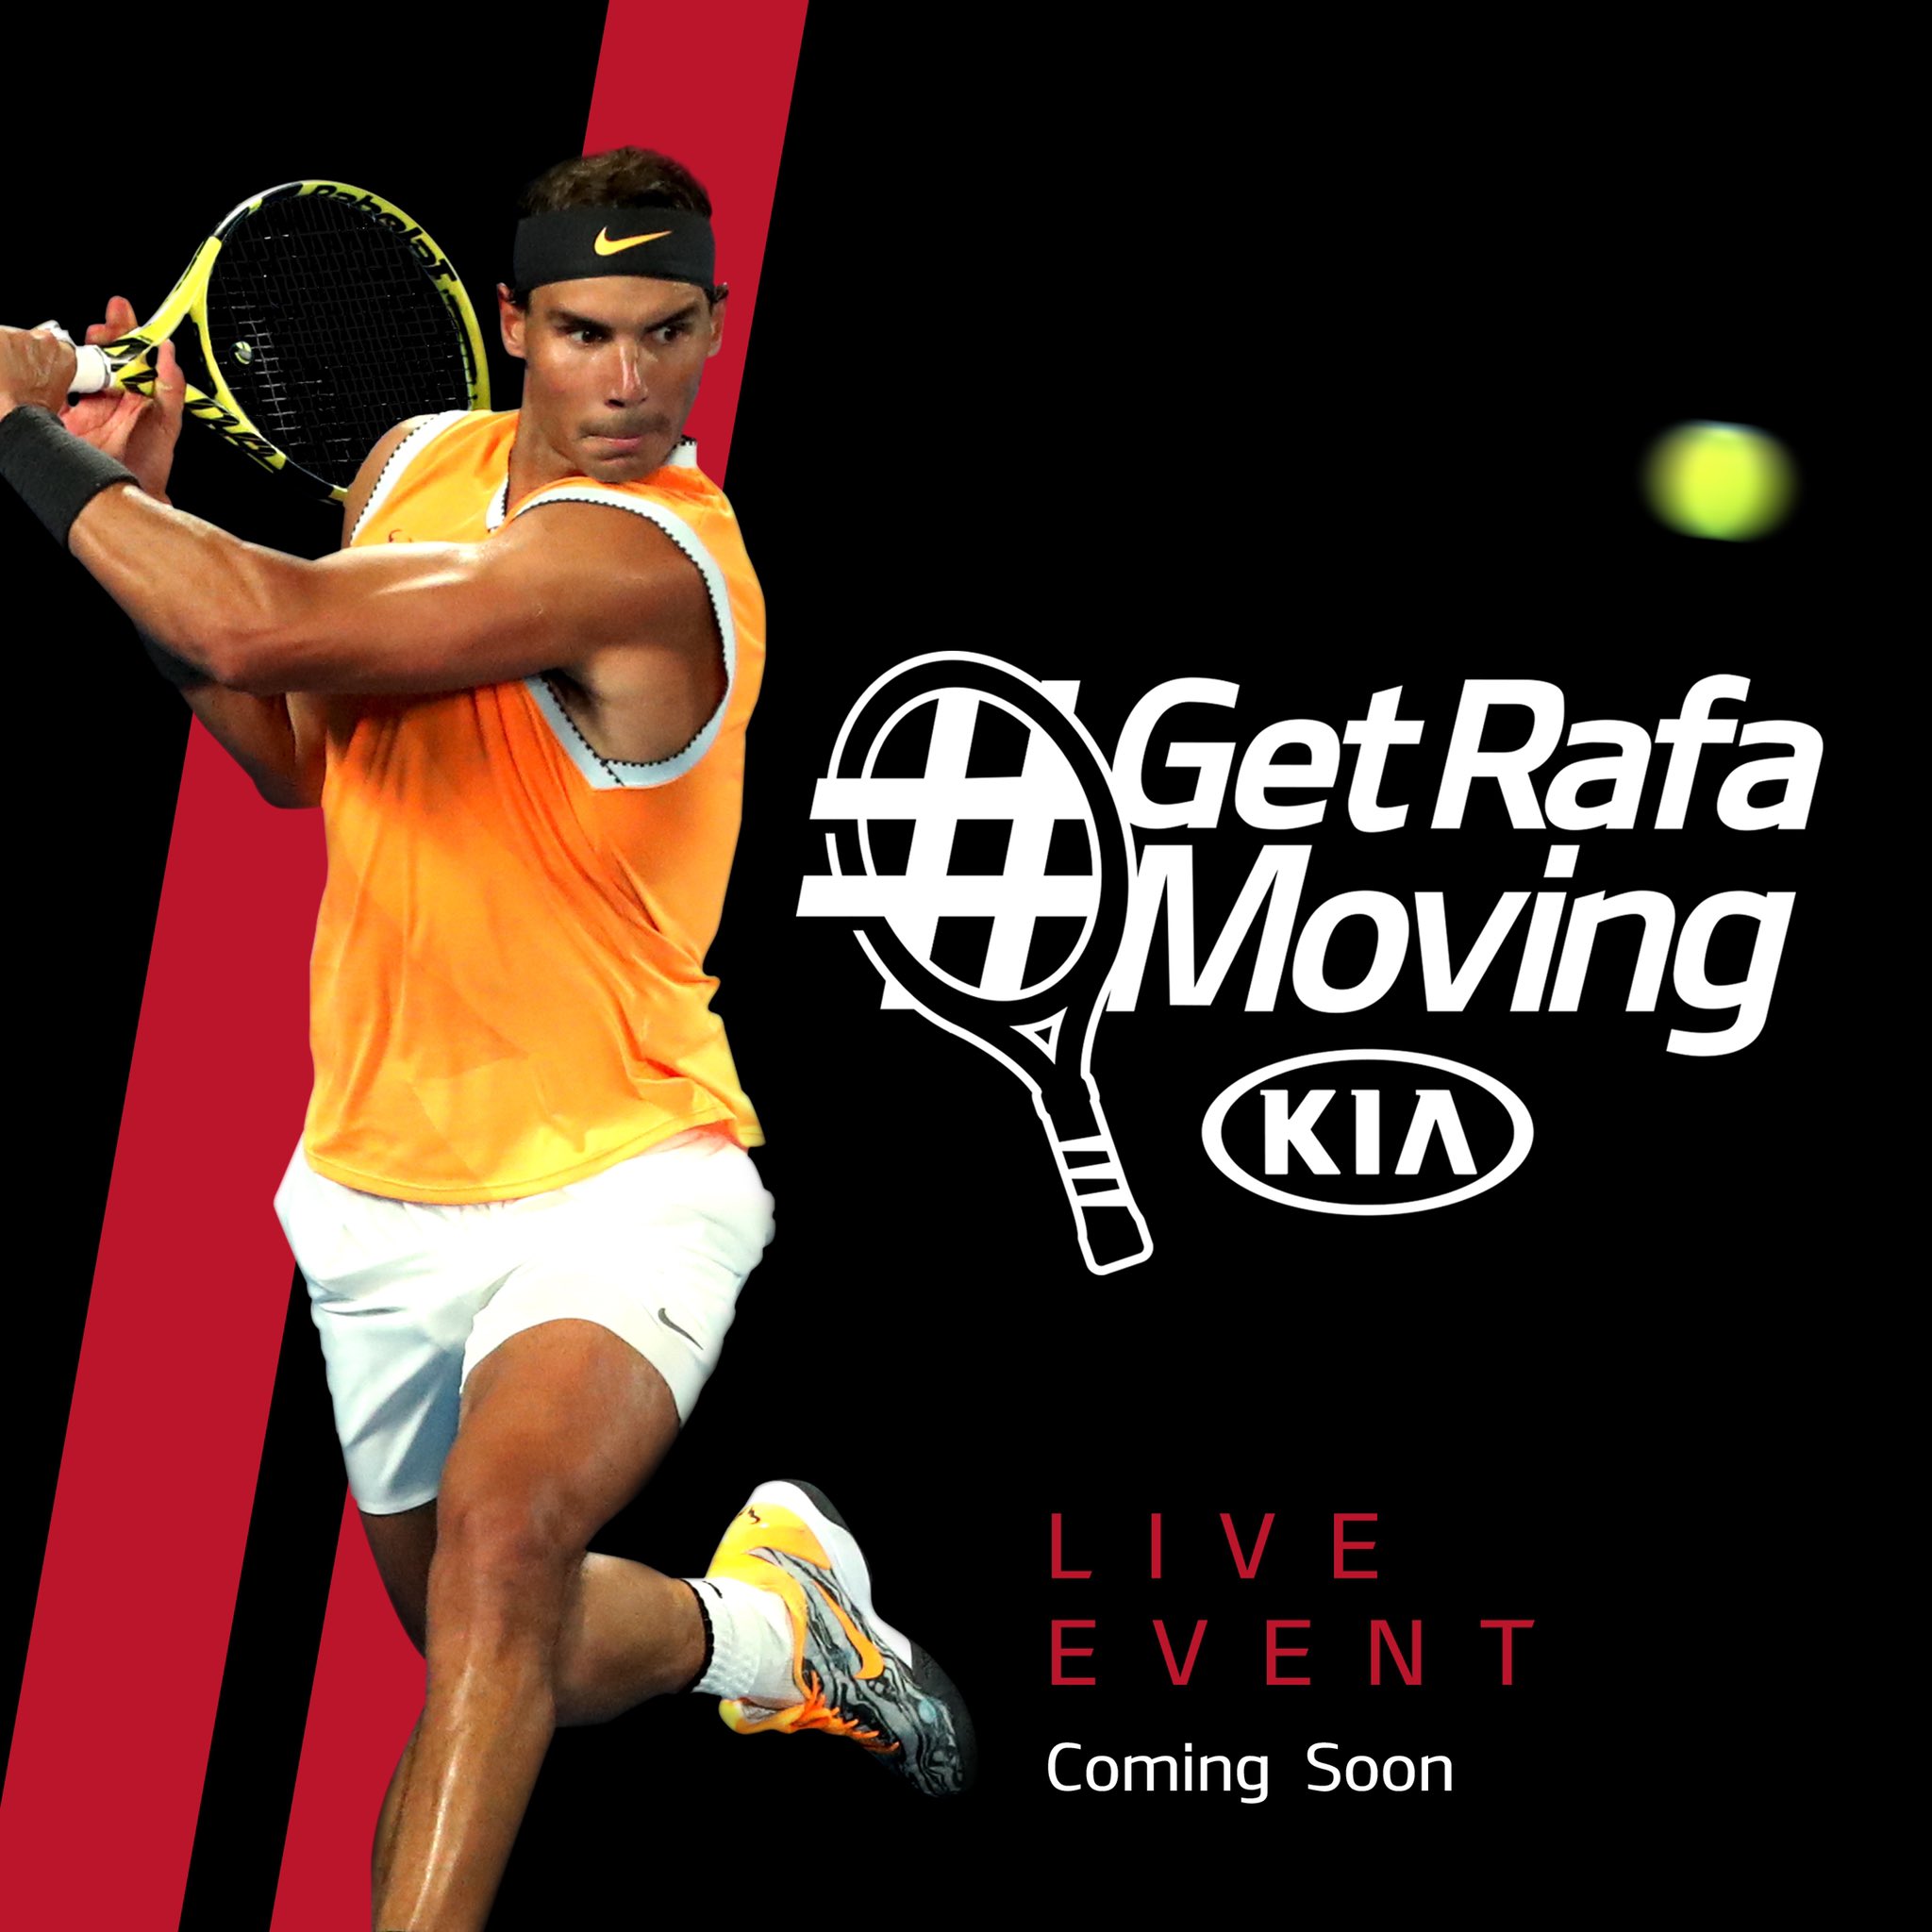 X 上的Rafa Nadal：「Tennis is coming back, so to help me get ready well be hosting an interactive live event, #GetRafaMoving on 24/07